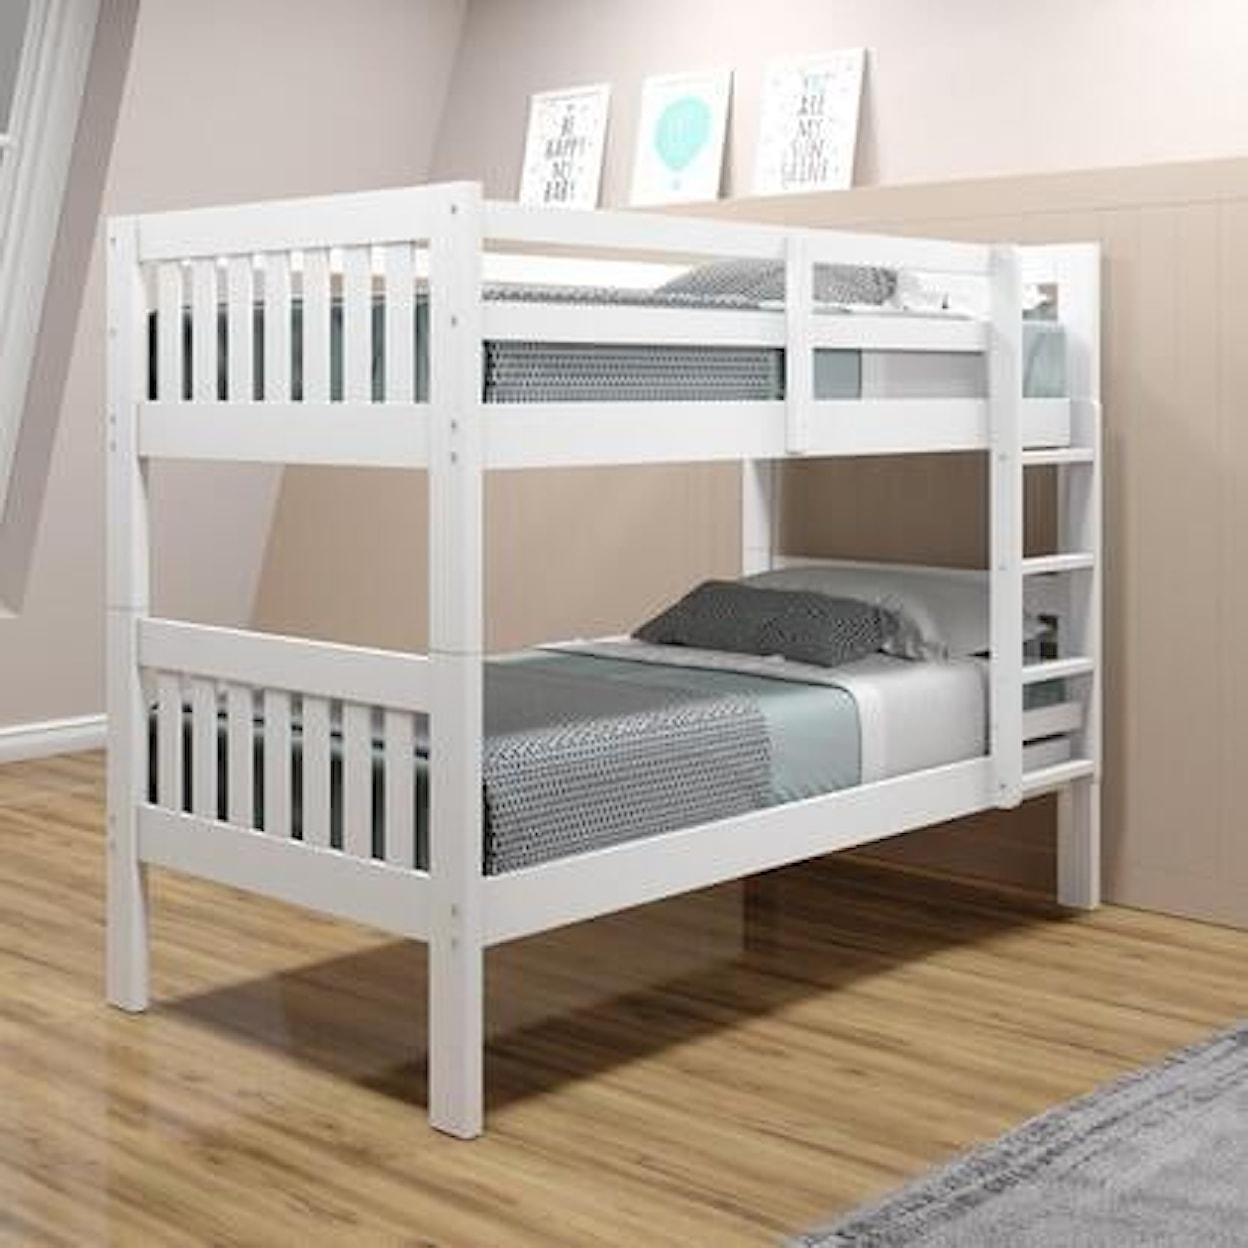 Donco Trading Co Bunkbeds MISSION WHITE TWIN/TWIN BUNK BED |